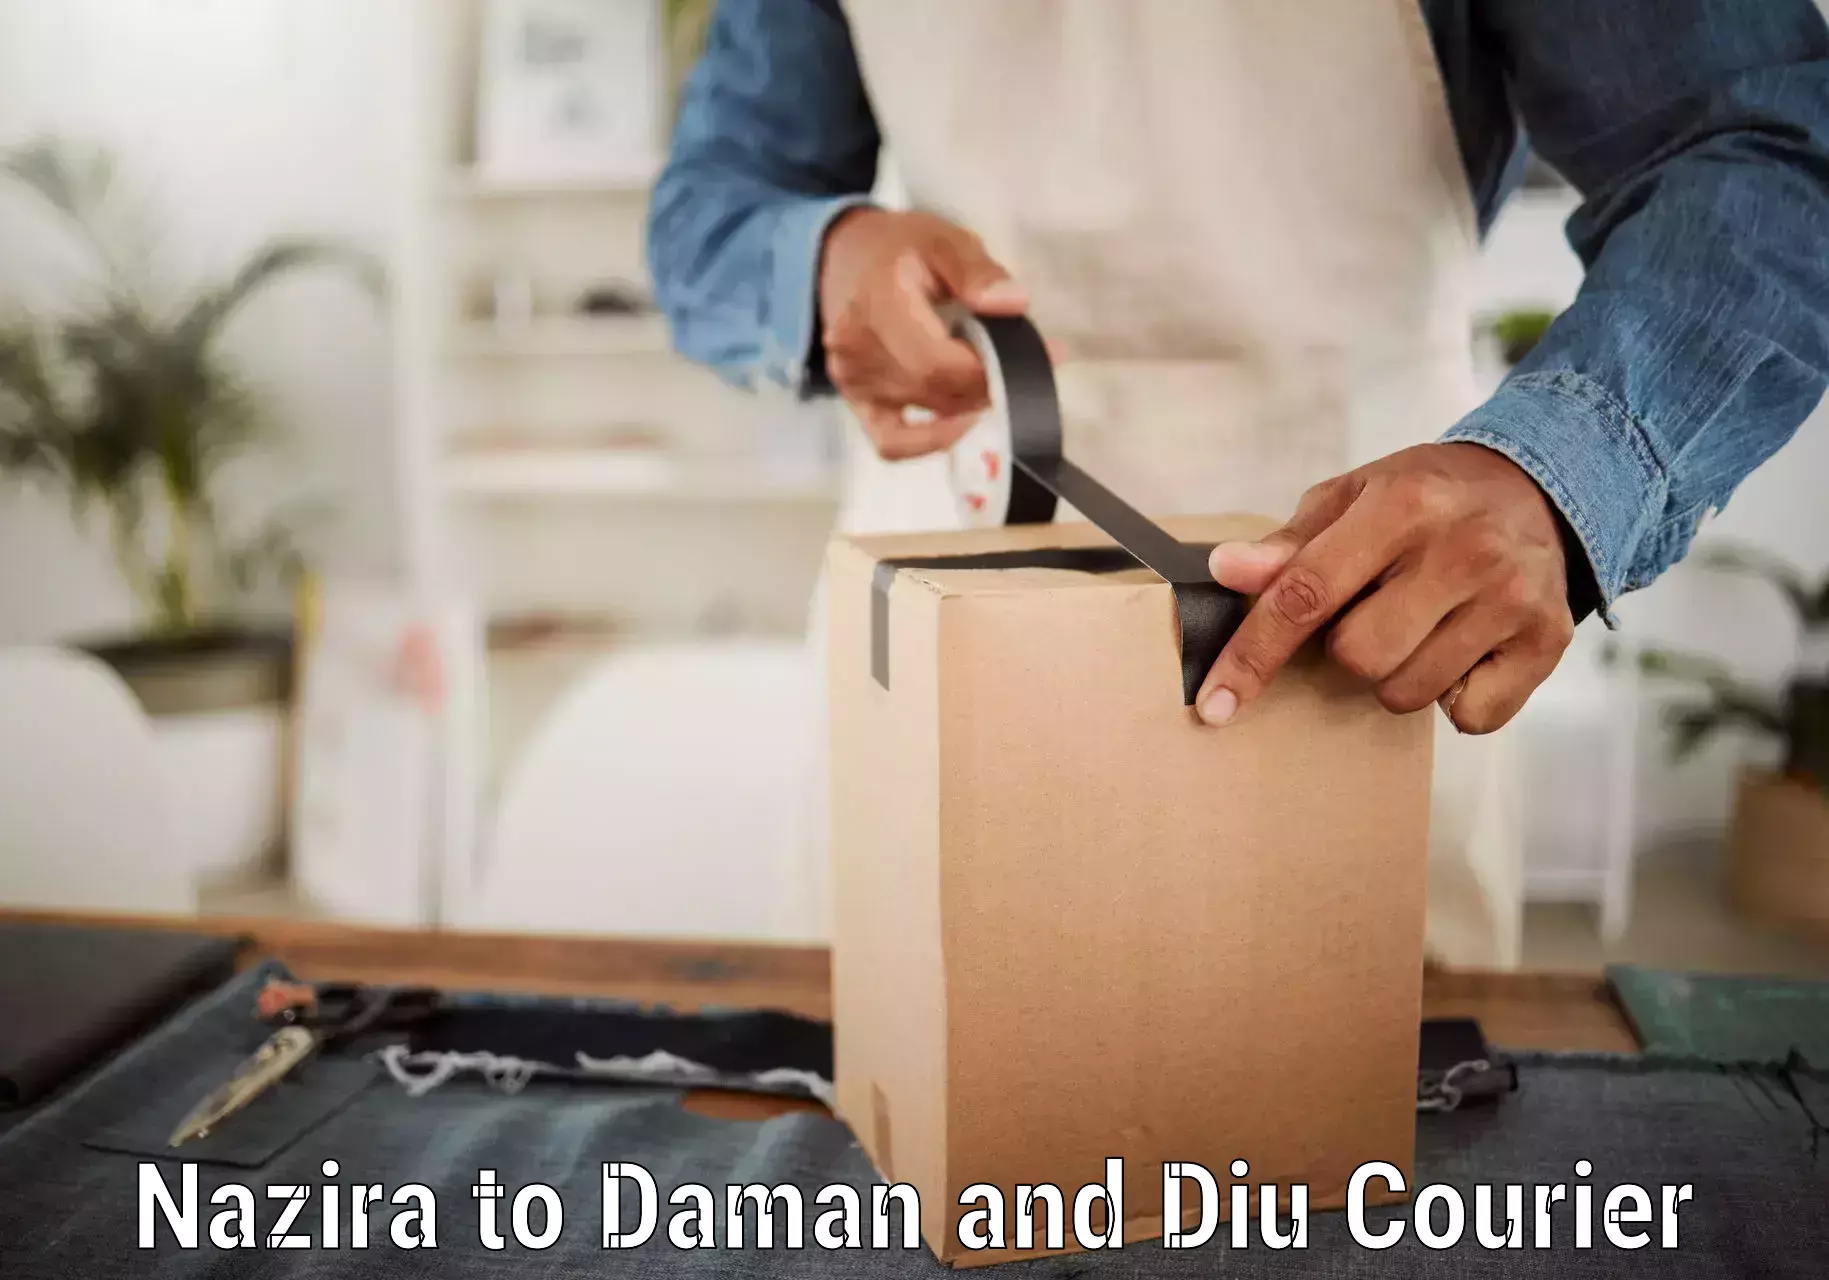 24/7 courier service in Nazira to Daman and Diu